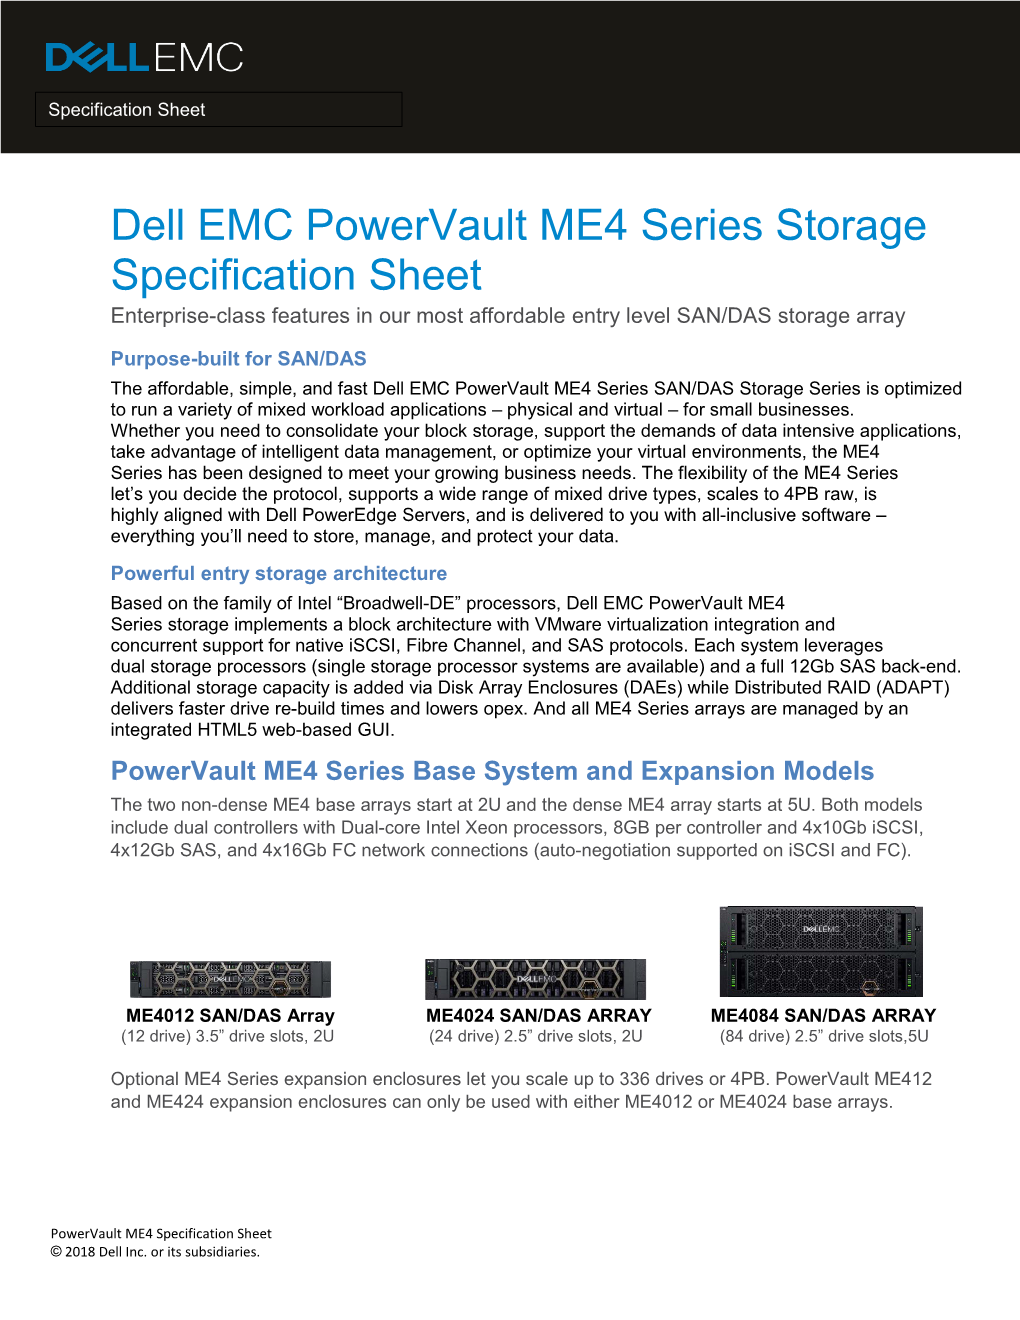 Dell EMC Powervault ME4 Series Storage Specification Sheet Enterprise-Class Features in Our Most Affordable Entry Level SAN/DAS Storage Array